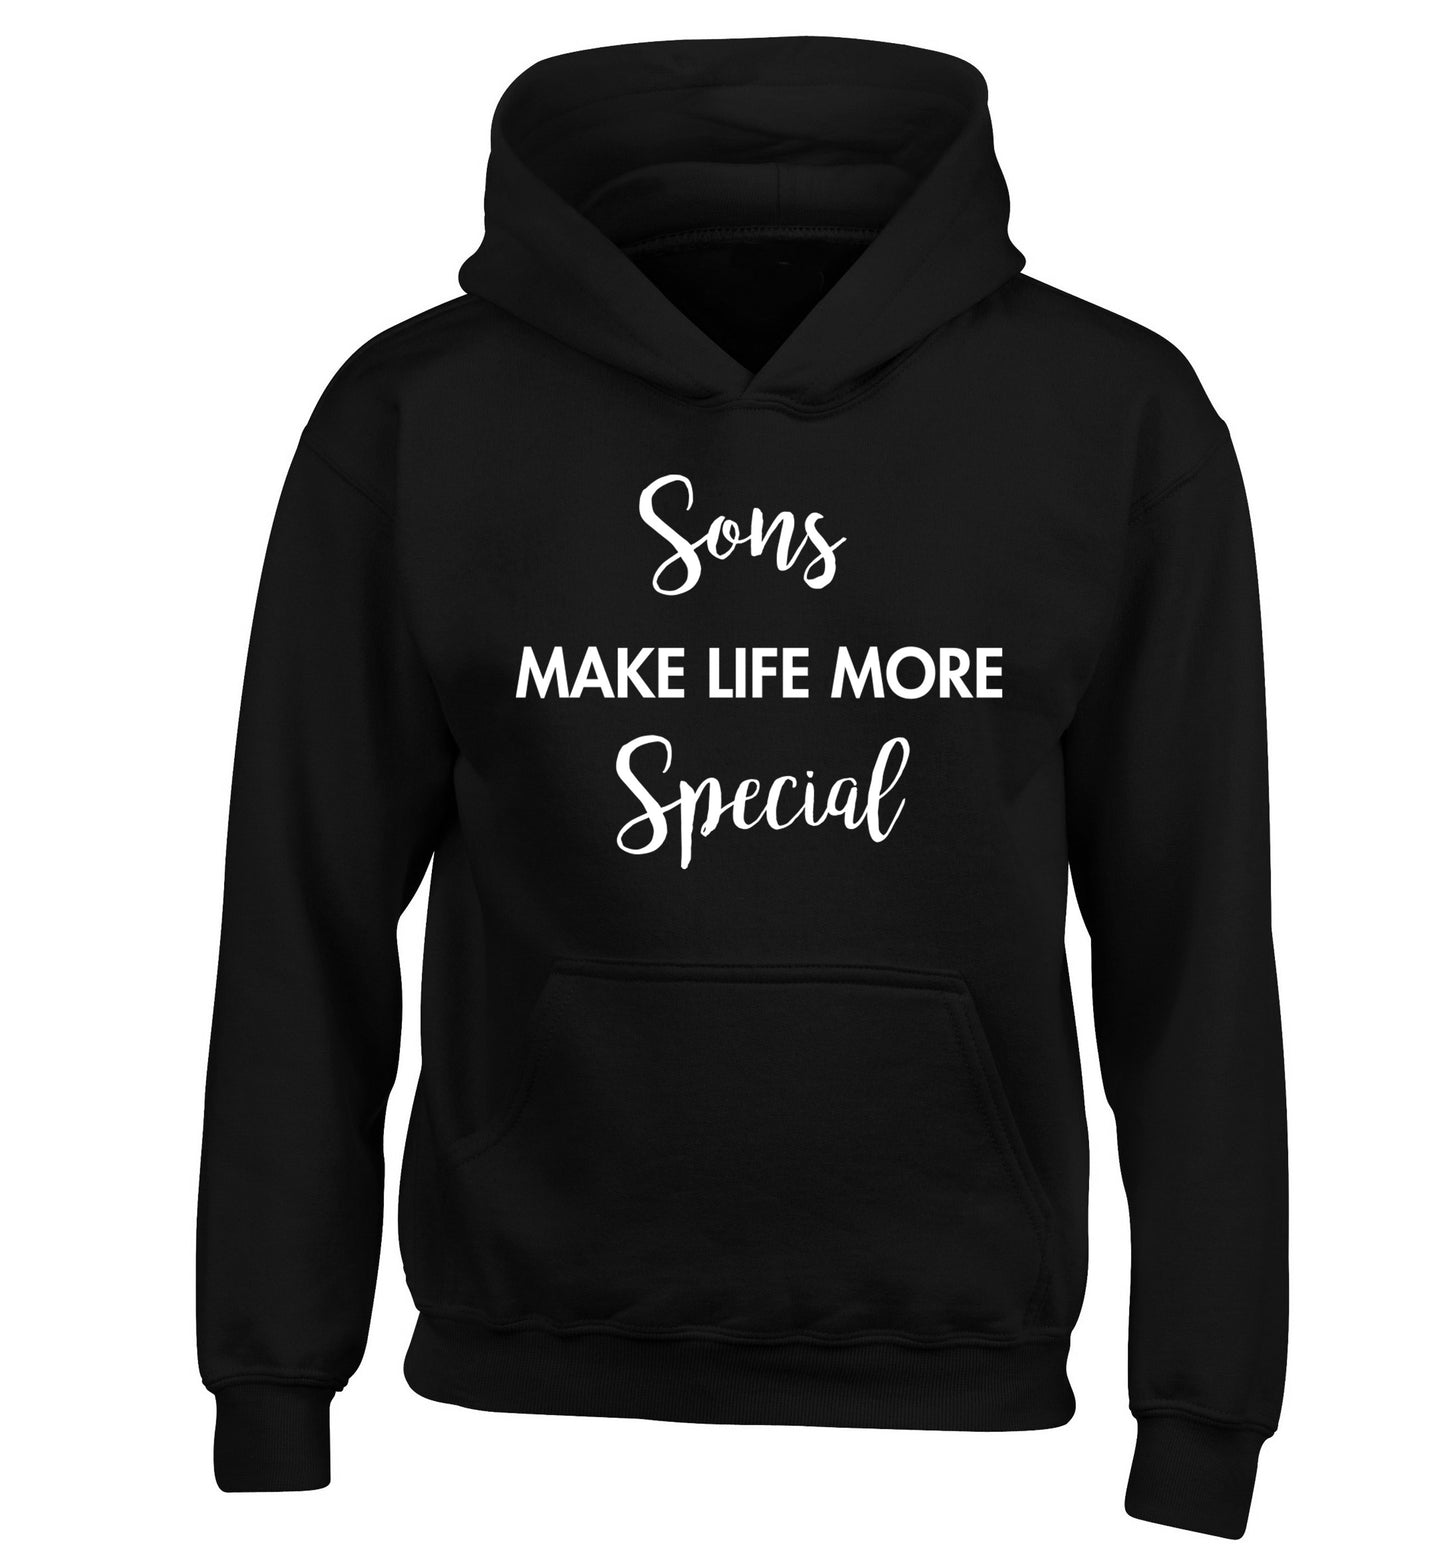 Daughters make life more special children's black hoodie 12-14 Years